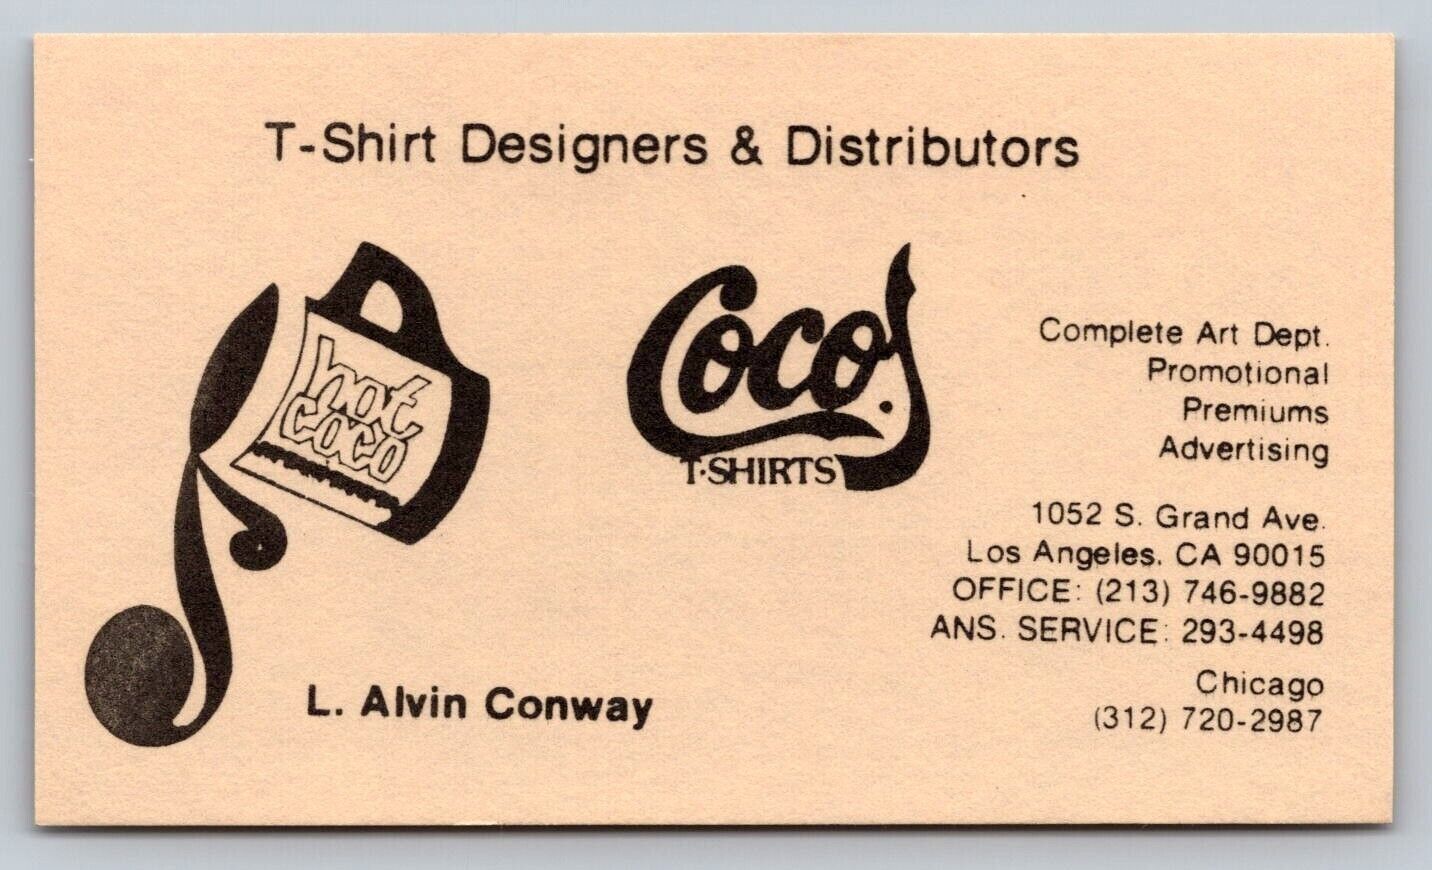 Vintage Business Card Coco T-Shirt Designers Los Angeles CA Chicago